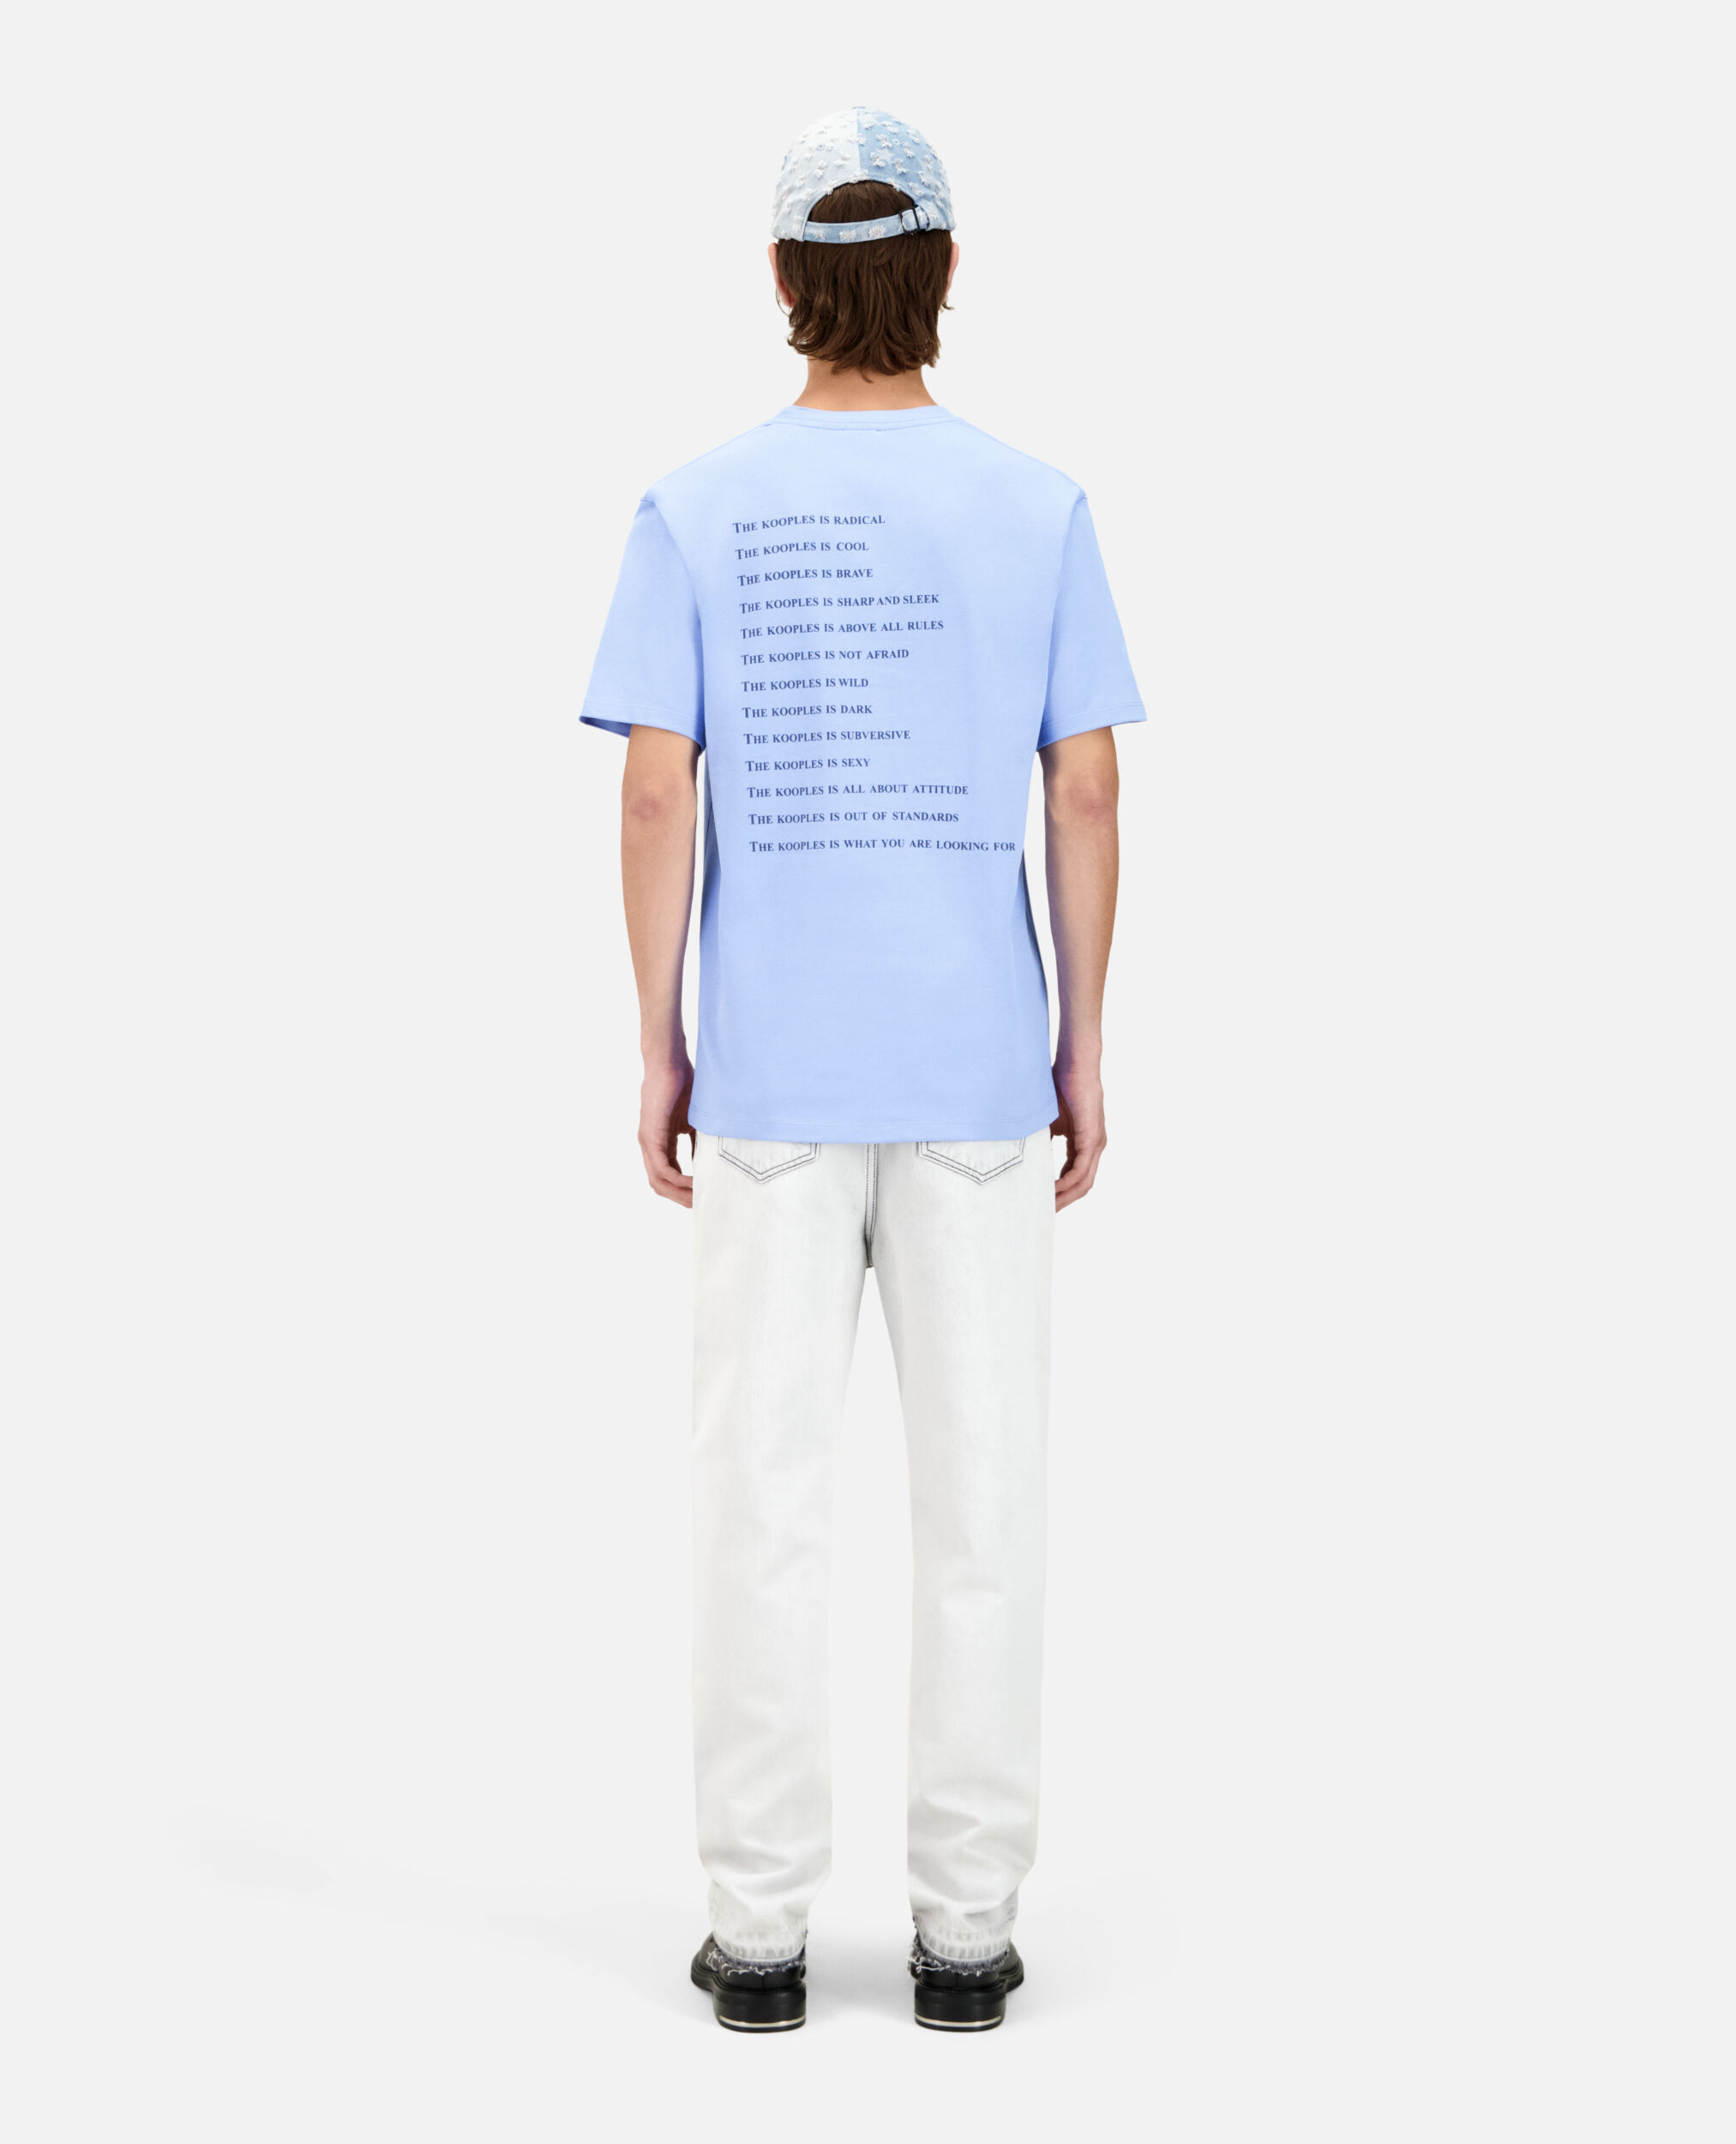 Camiseta What is azul cielo, STEEL BLUE, hi-res image number null